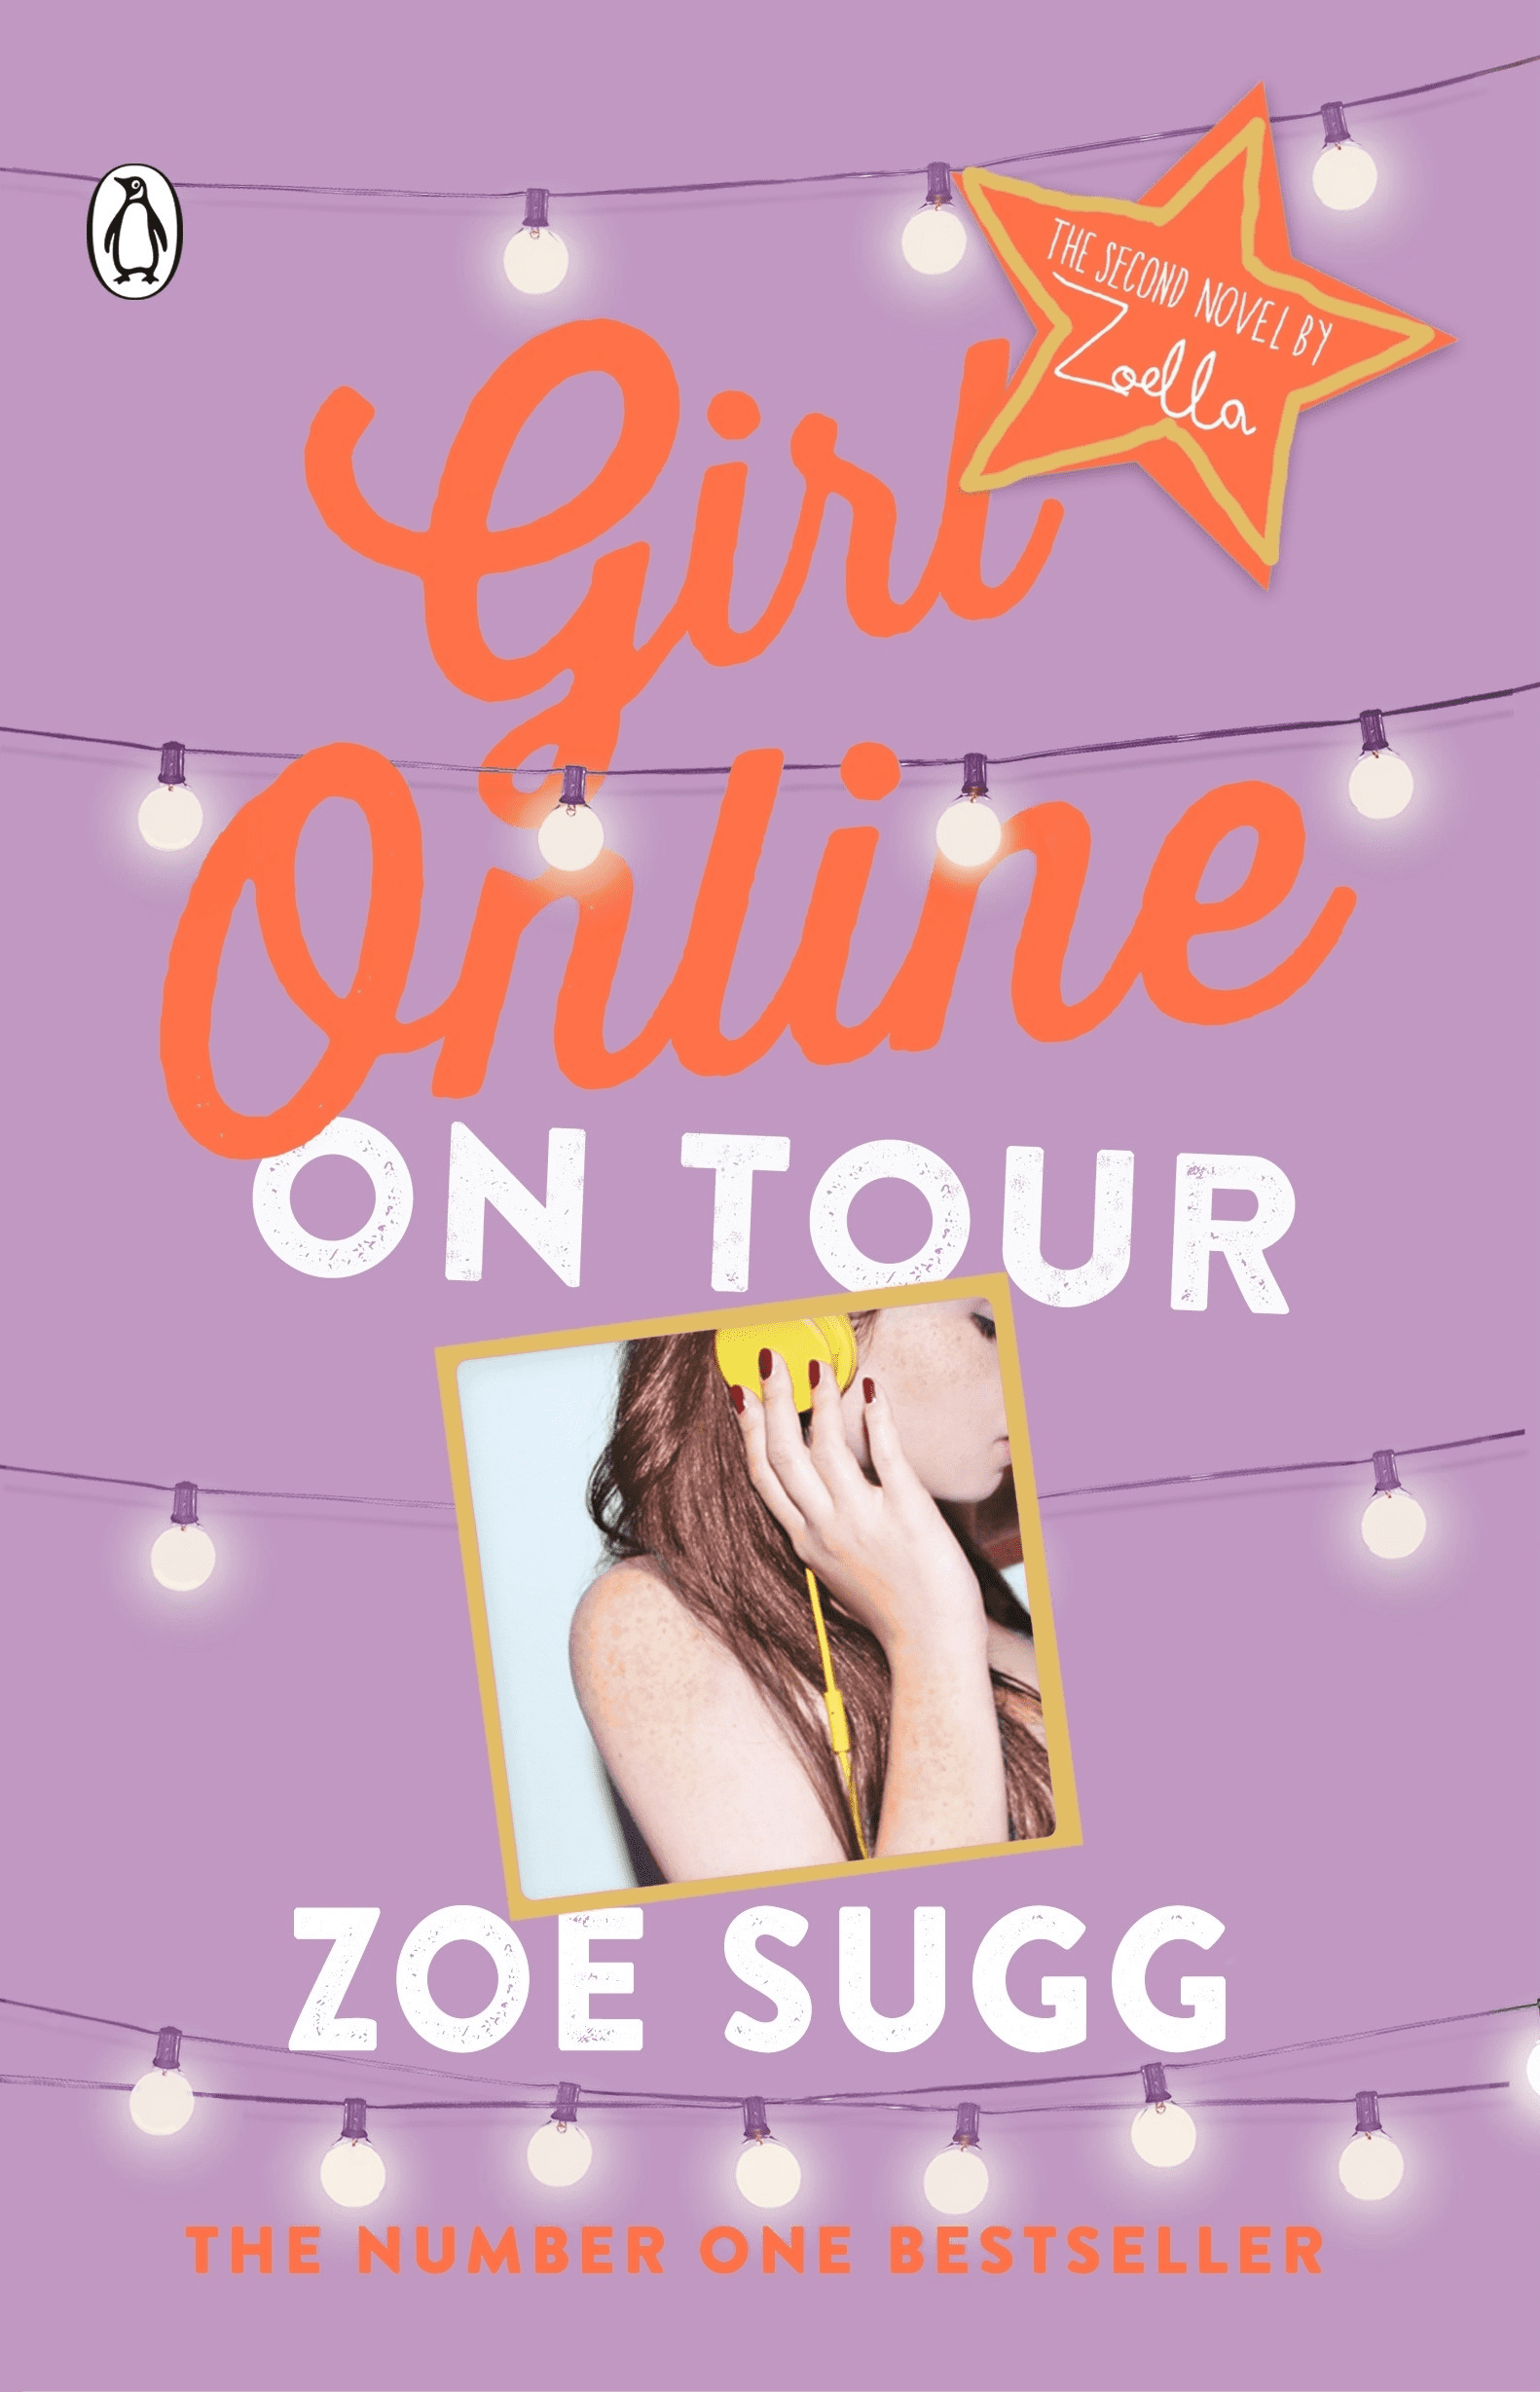 Girl Online: On Tour: The Second Novel by Zoella (Girl Online Book Book 2)